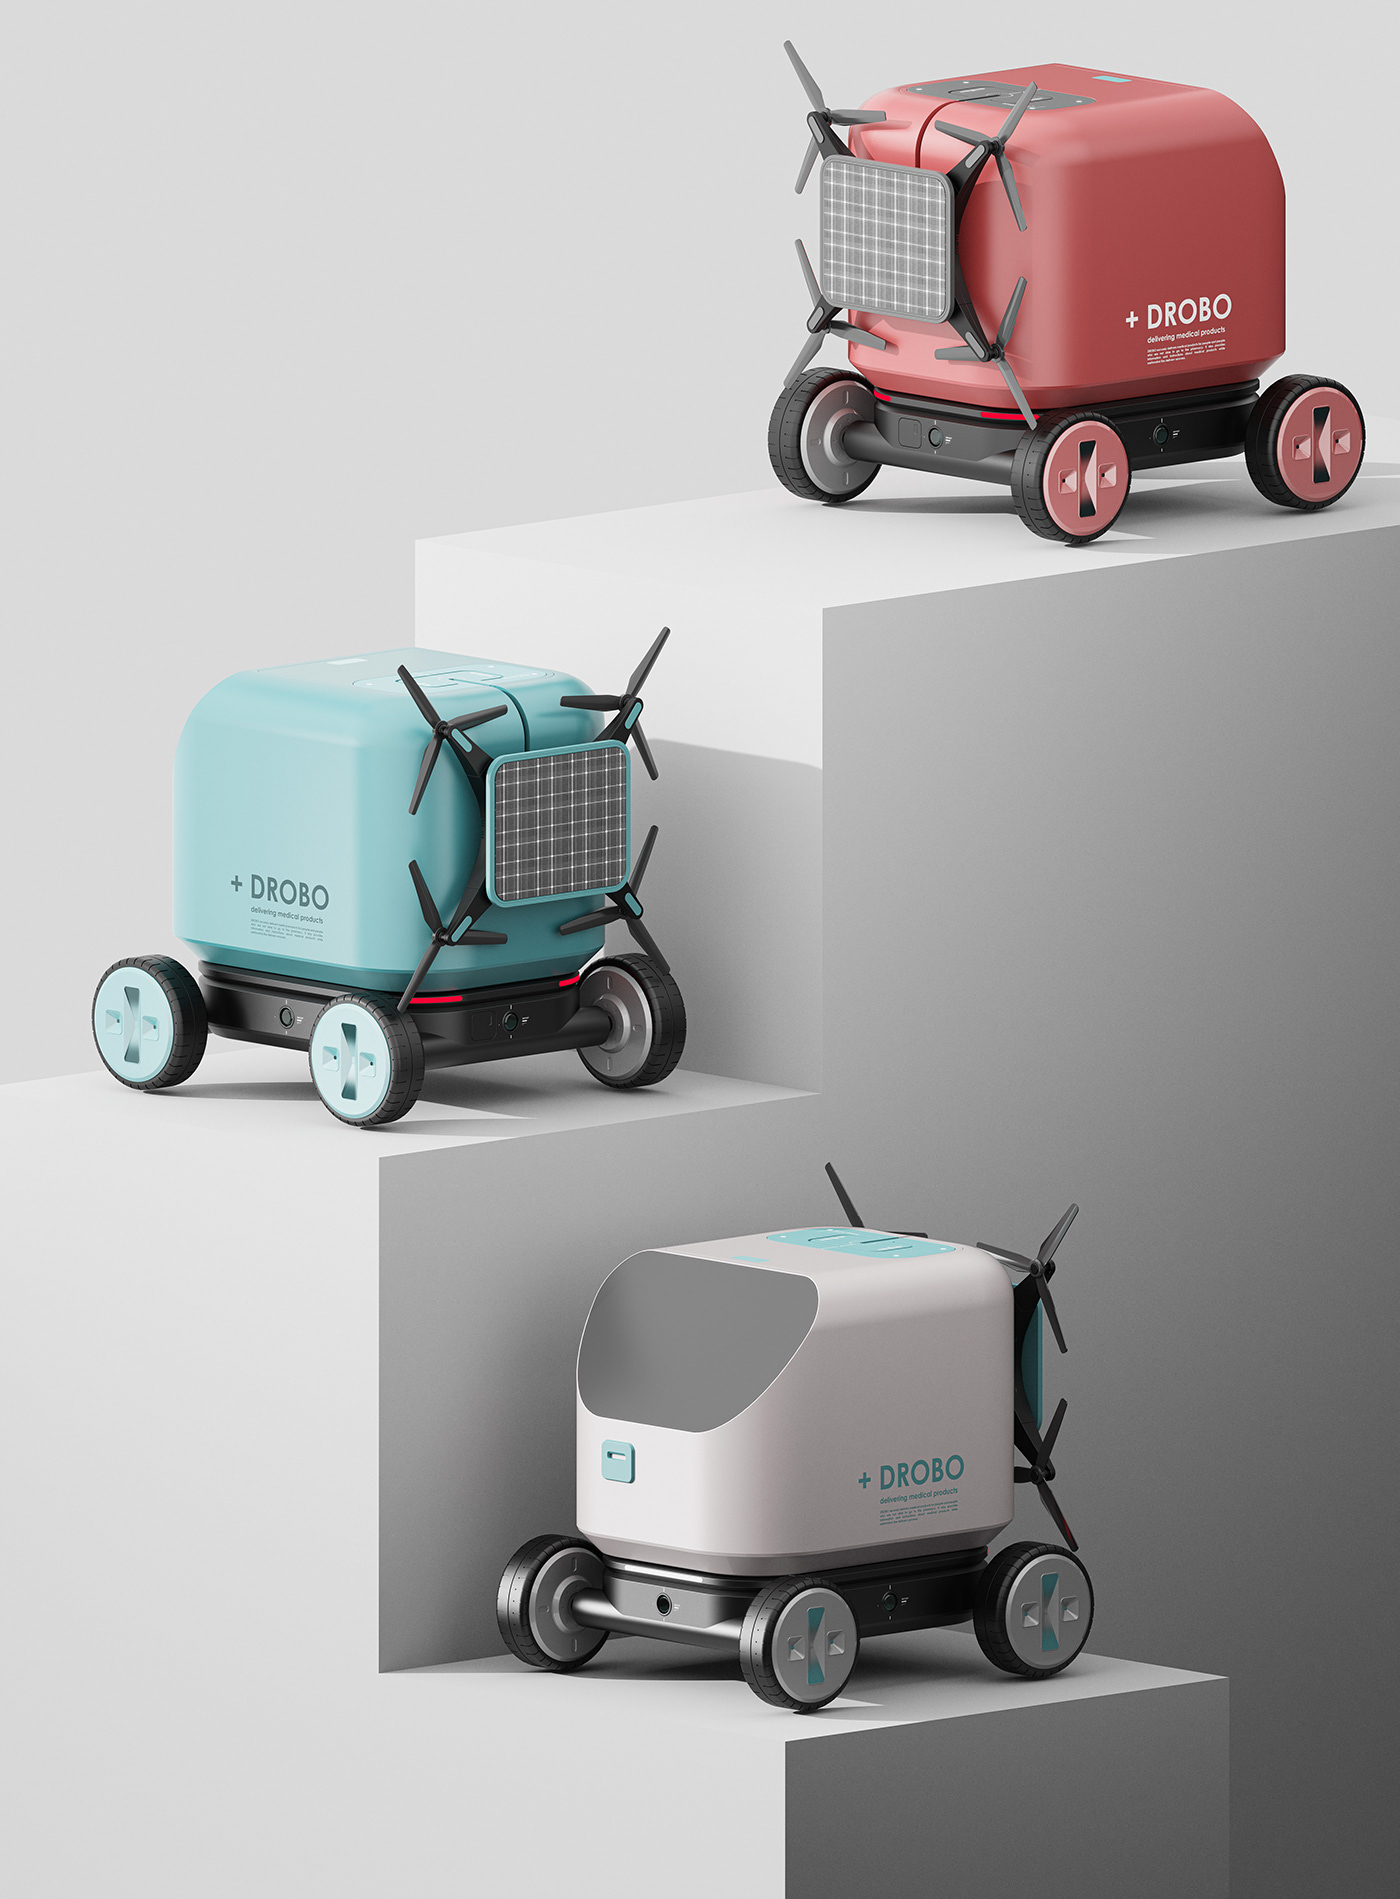 design industrial design  interaction product product design  Render delivery robot robots